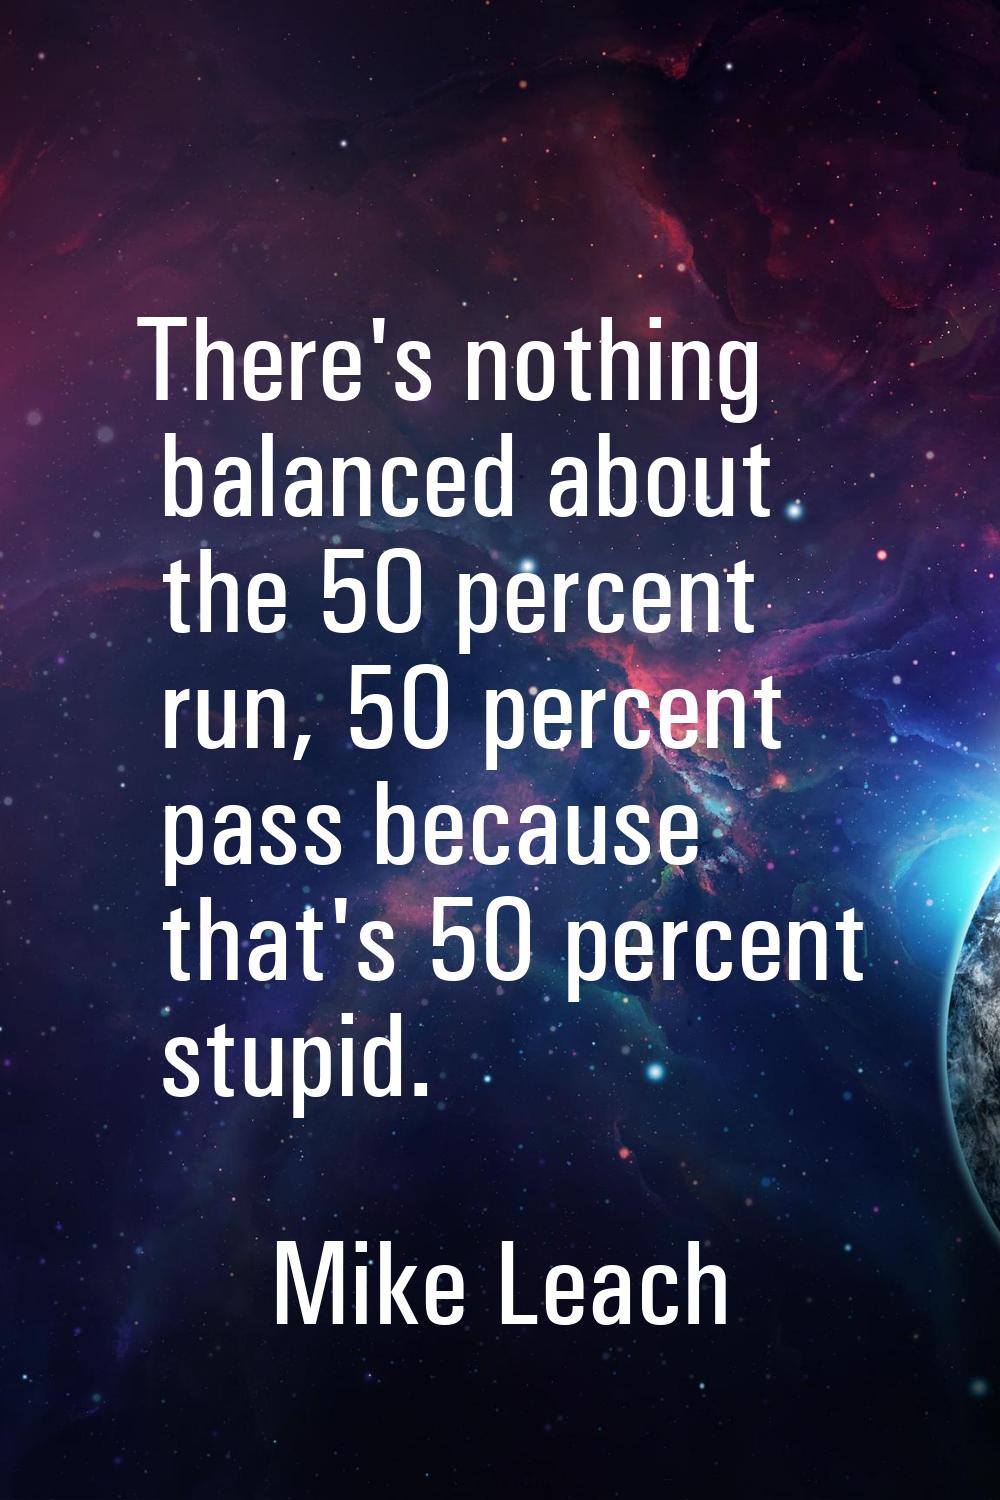 There's nothing balanced about the 50 percent run, 50 percent pass because that's 50 percent stupid